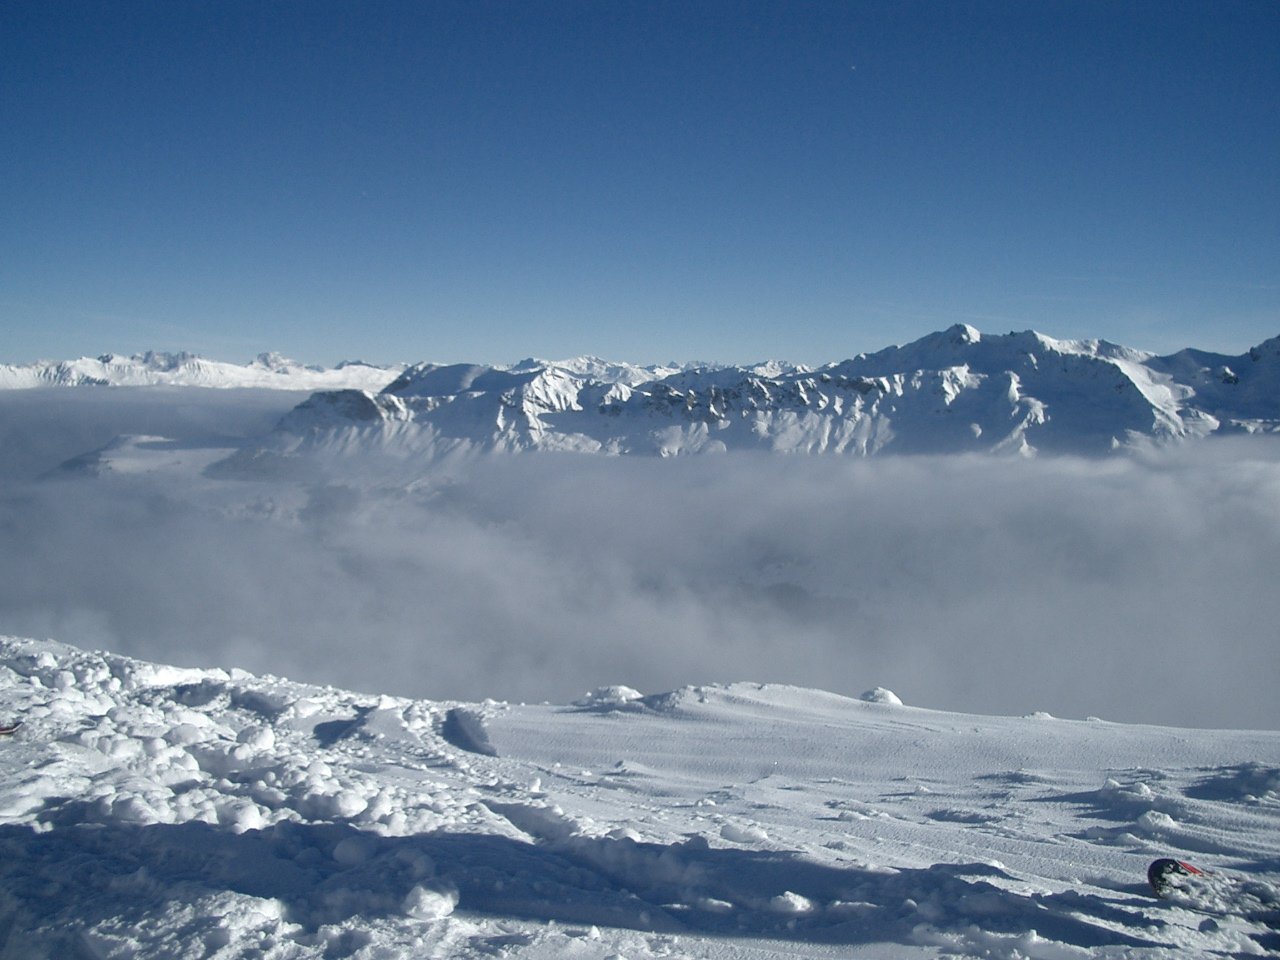 there are snow - capped mountains that are covered by low lying clouds